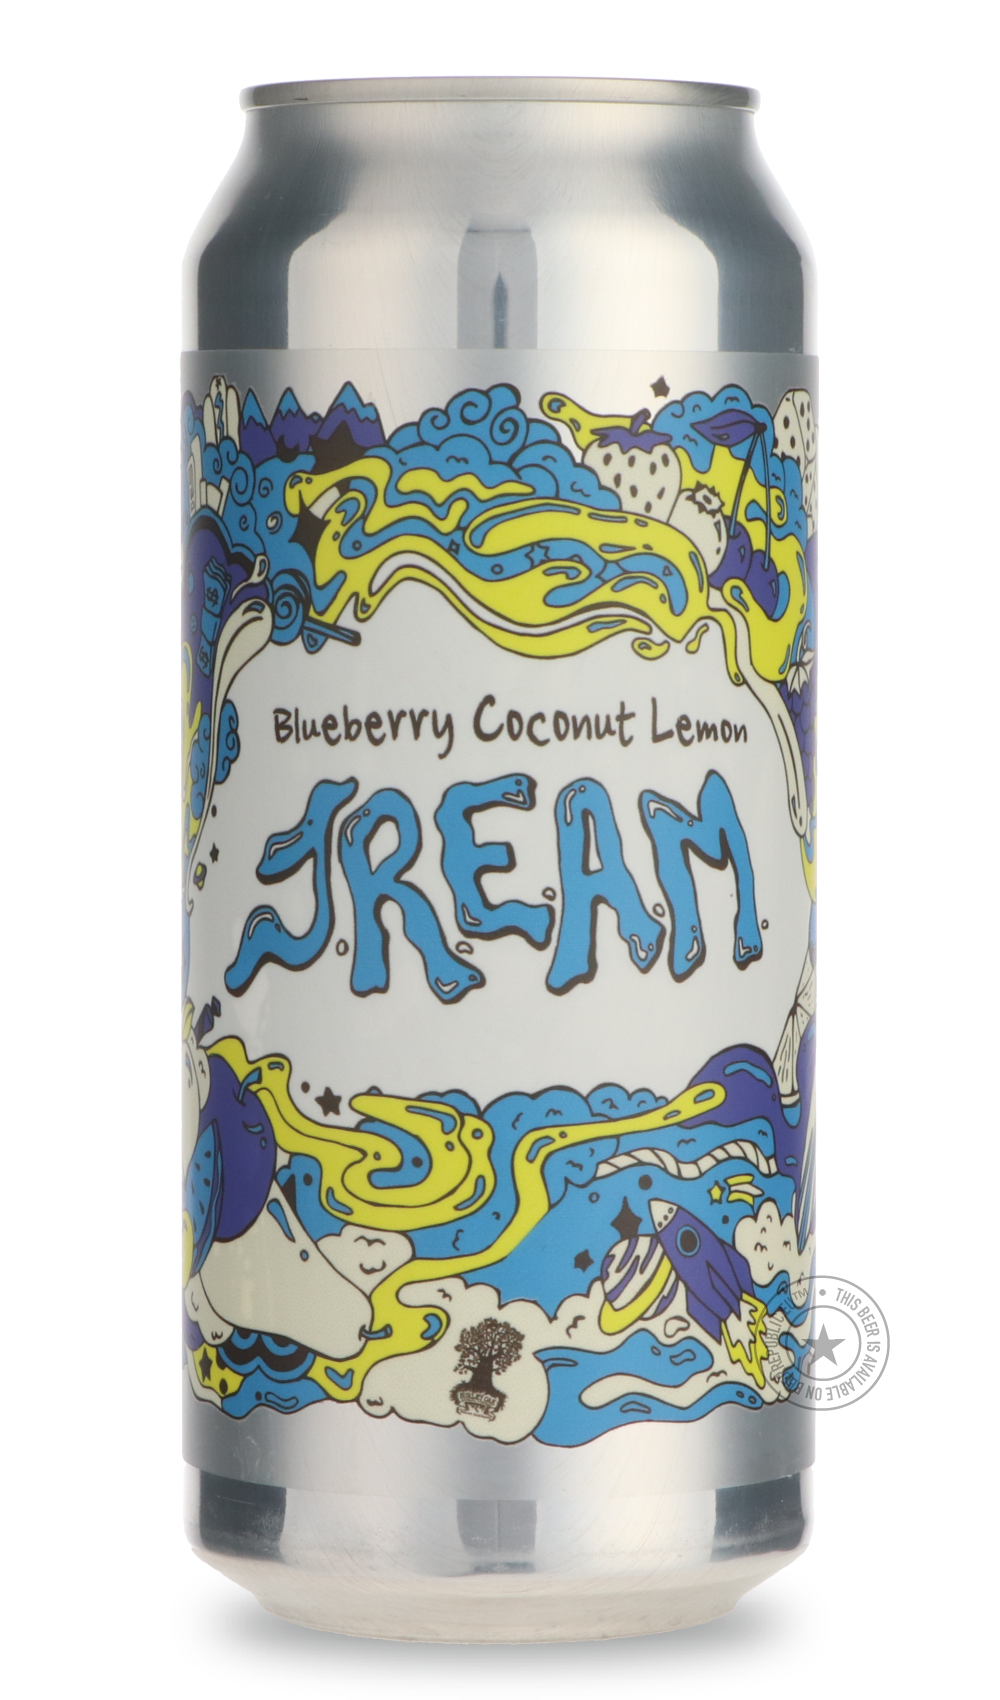 -Burley Oak- Blueberry Coconut Lemon J.R.E.A.M.-Sour / Wild & Fruity- Only @ Beer Republic - The best online beer store for American & Canadian craft beer - Buy beer online from the USA and Canada - Bier online kopen - Amerikaans bier kopen - Craft beer store - Craft beer kopen - Amerikanisch bier kaufen - Bier online kaufen - Acheter biere online - IPA - Stout - Porter - New England IPA - Hazy IPA - Imperial Stout - Barrel Aged - Barrel Aged Imperial Stout - Brown - Dark beer - Blond - Blonde - Pilsner - L